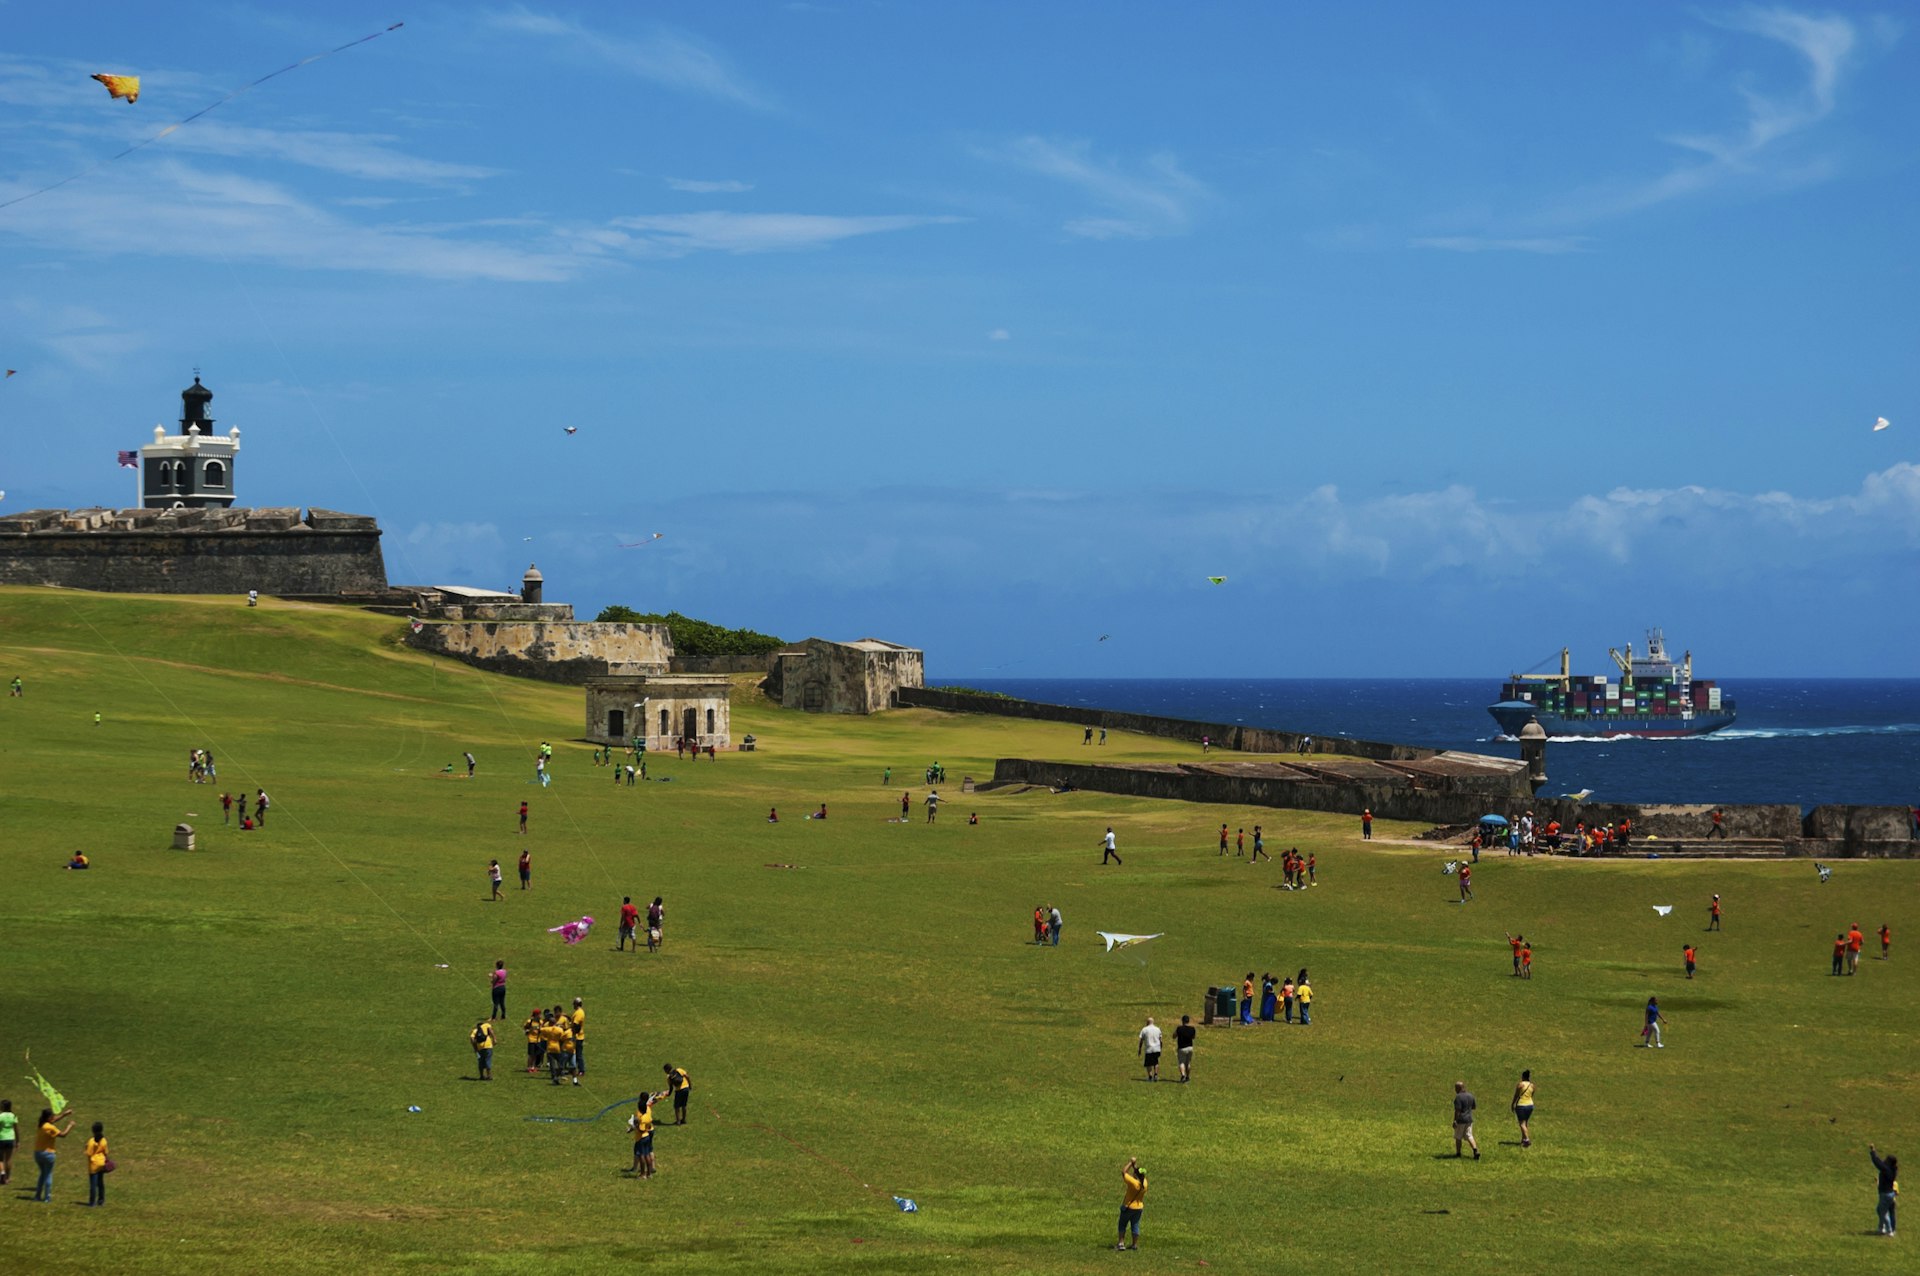 Children and parents are playing with kites in front of a seaside fortress 